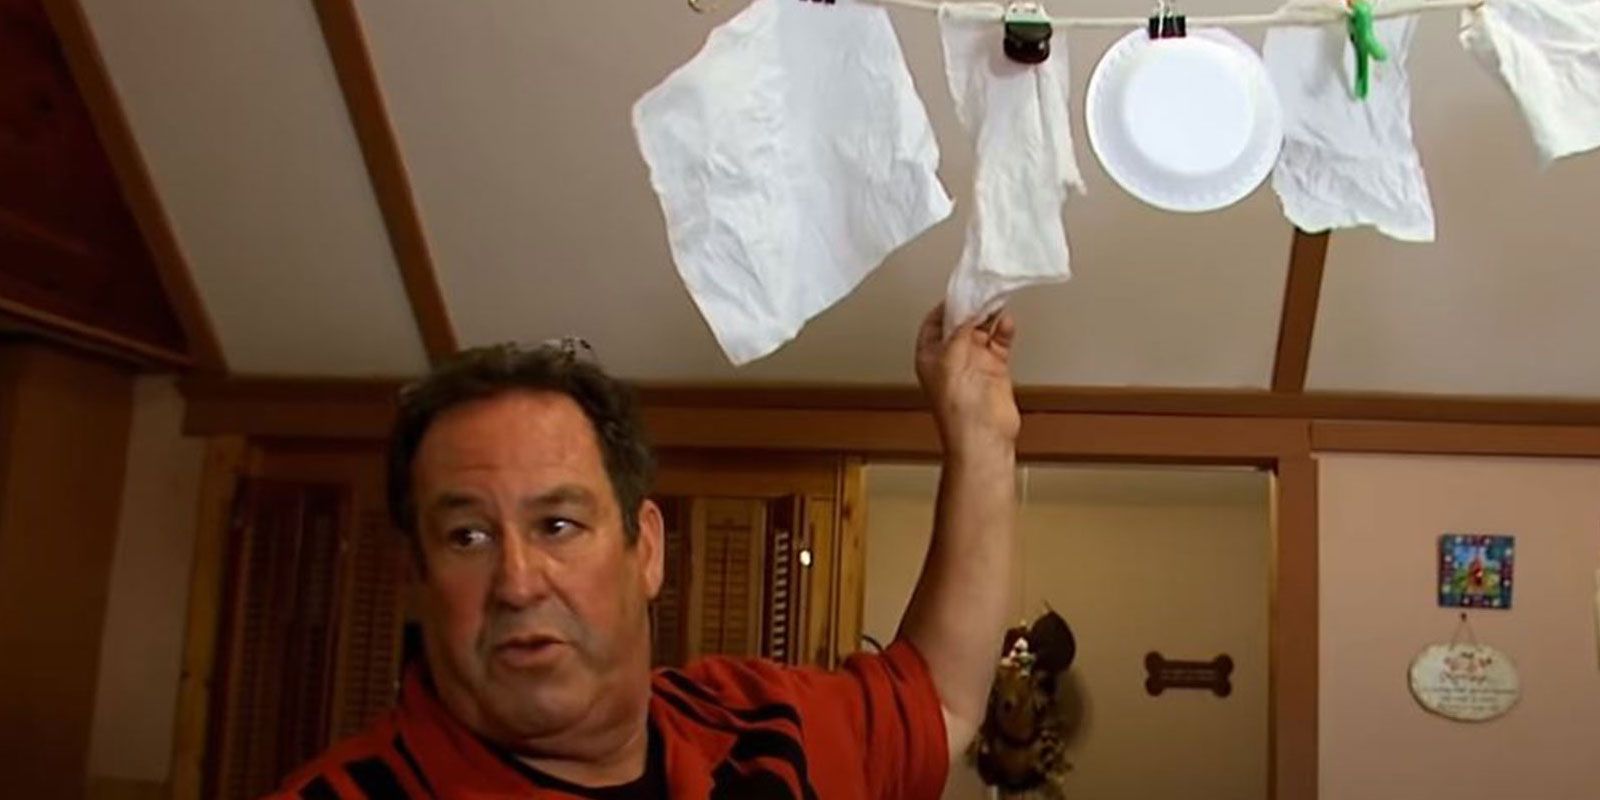 Roy Extreme Cheapskates drying disposable plates and napkins